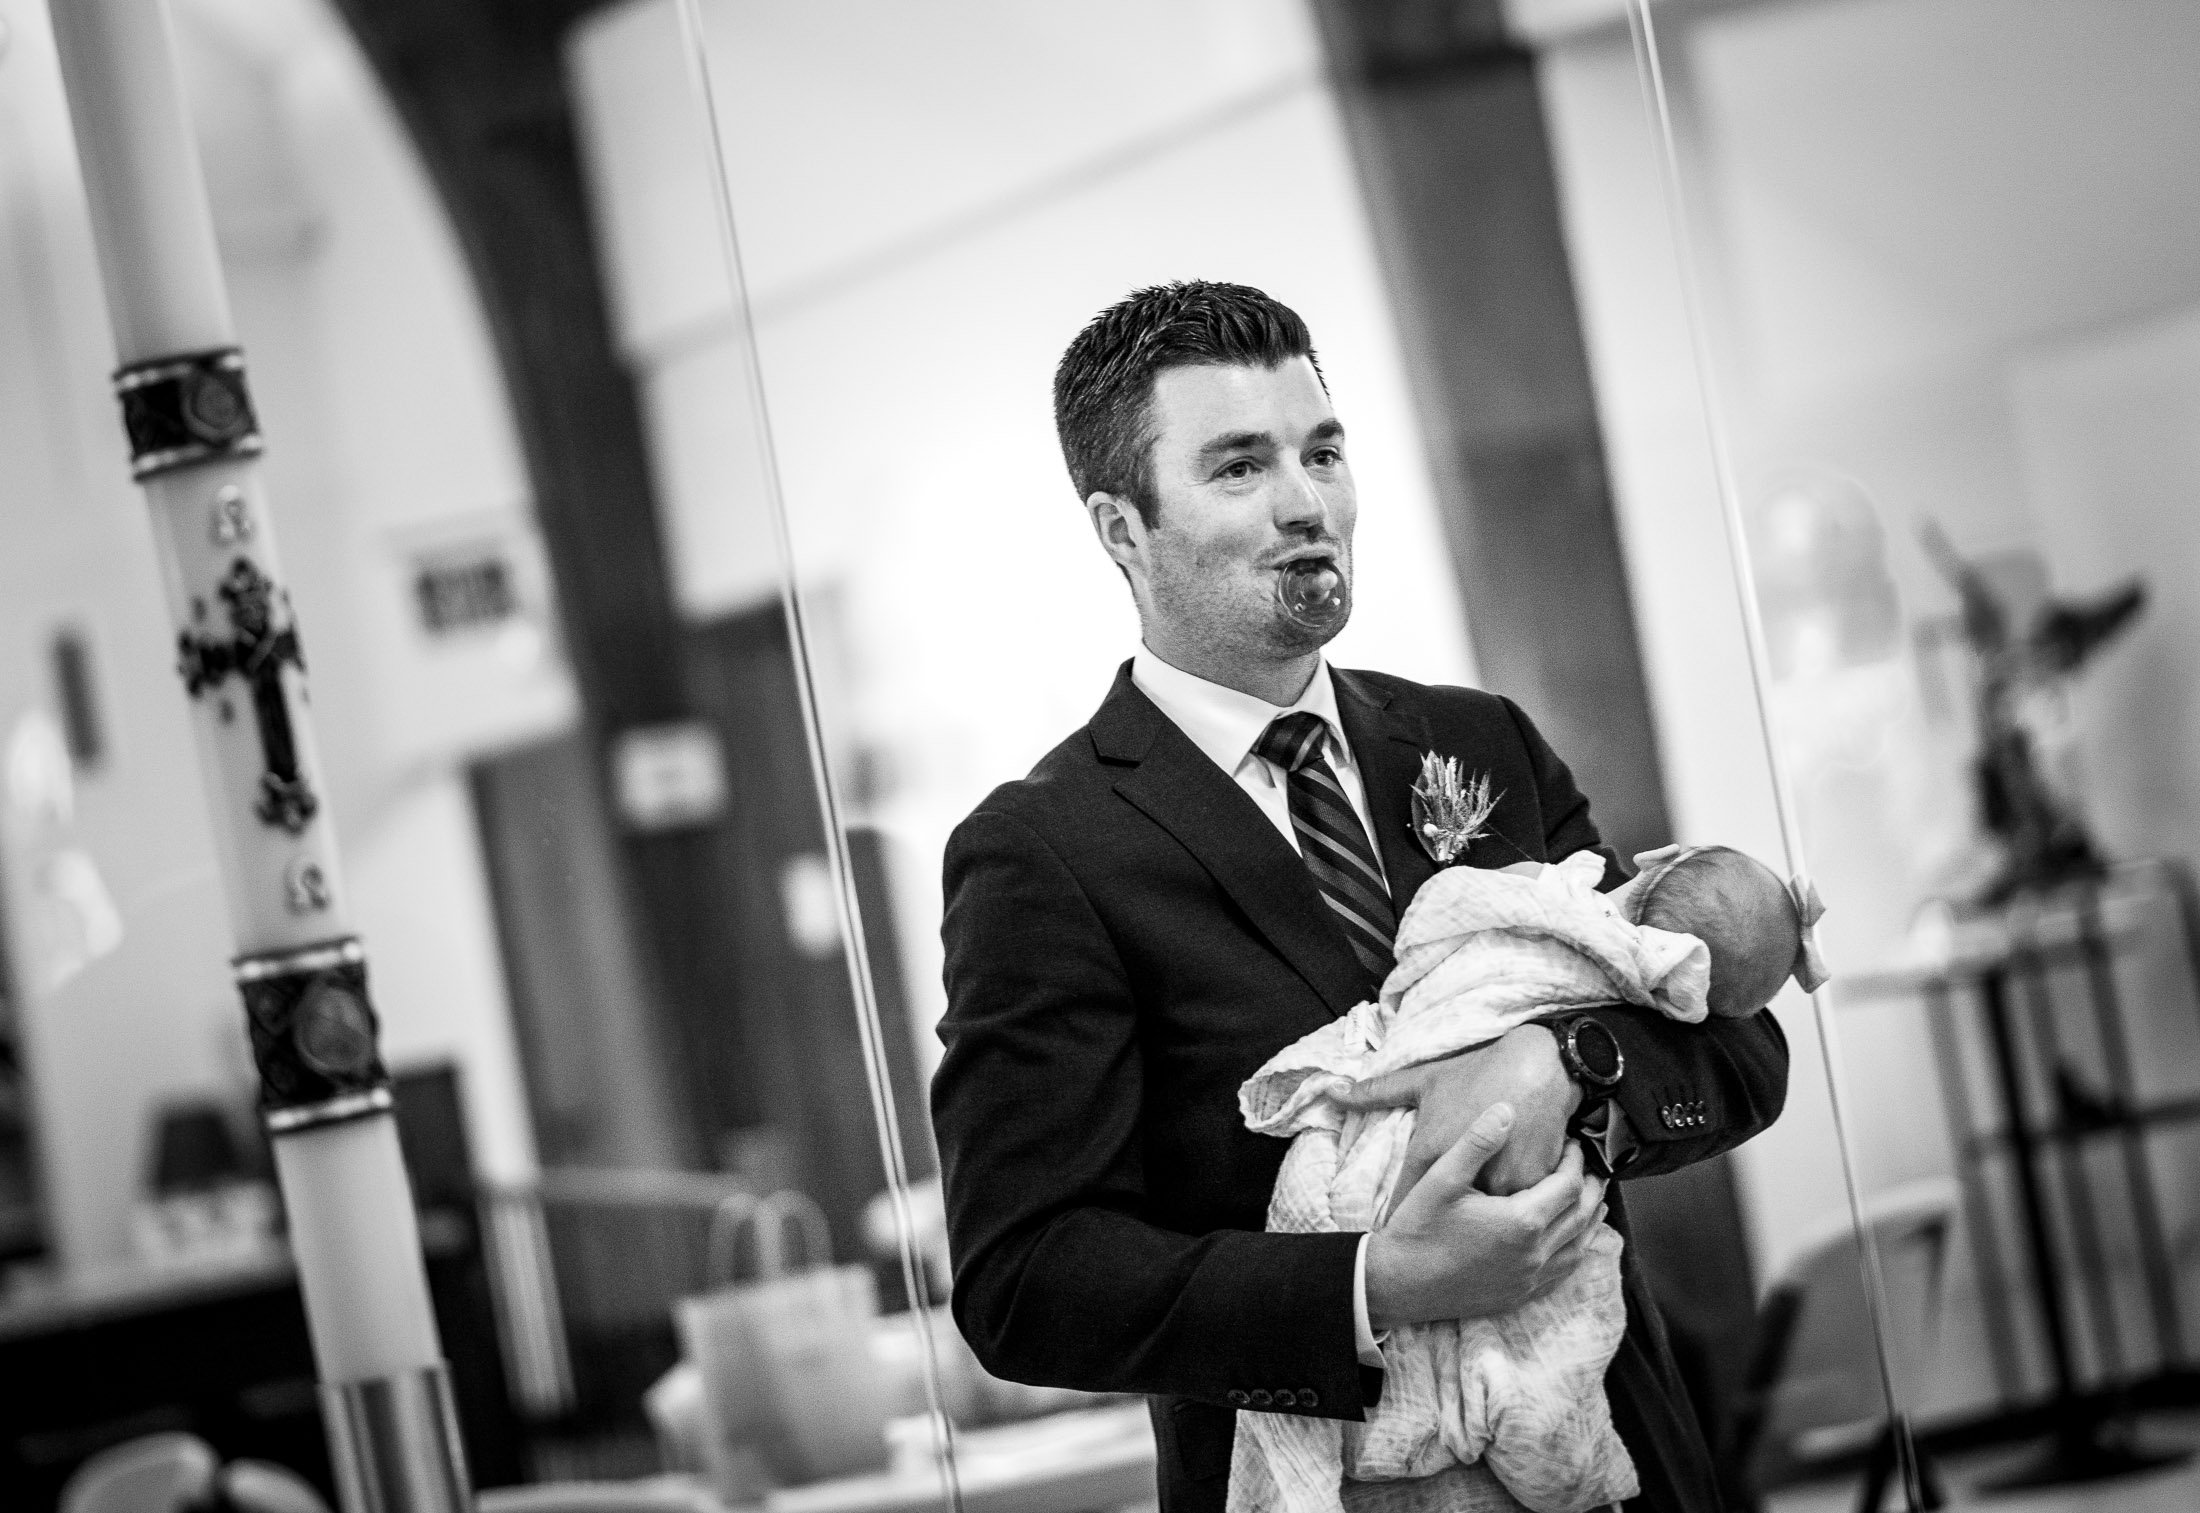 Bride's brother holds his baby during his sister's catholic wedding ceremony at the church, wedding, wedding photos, wedding photography, wedding photographer, wedding inspiration, wedding photo inspiration, wedding portraits, wedding ceremony, wedding reception, mountain wedding, Catholic Church wedding, Catholic Church wedding photos, Catholic Church wedding photography, Catholic Church wedding photographer, Catholic Church wedding inspiration, Catholic Church wedding venue, Steamboat Springs wedding, Steamboat Springs wedding photos, Steamboat Springs wedding photography, Steamboat Springs wedding photographer, Colorado wedding, Colorado wedding photos, Colorado wedding photography, Colorado wedding photographer, Colorado mountain wedding, Colorado wedding inspiration